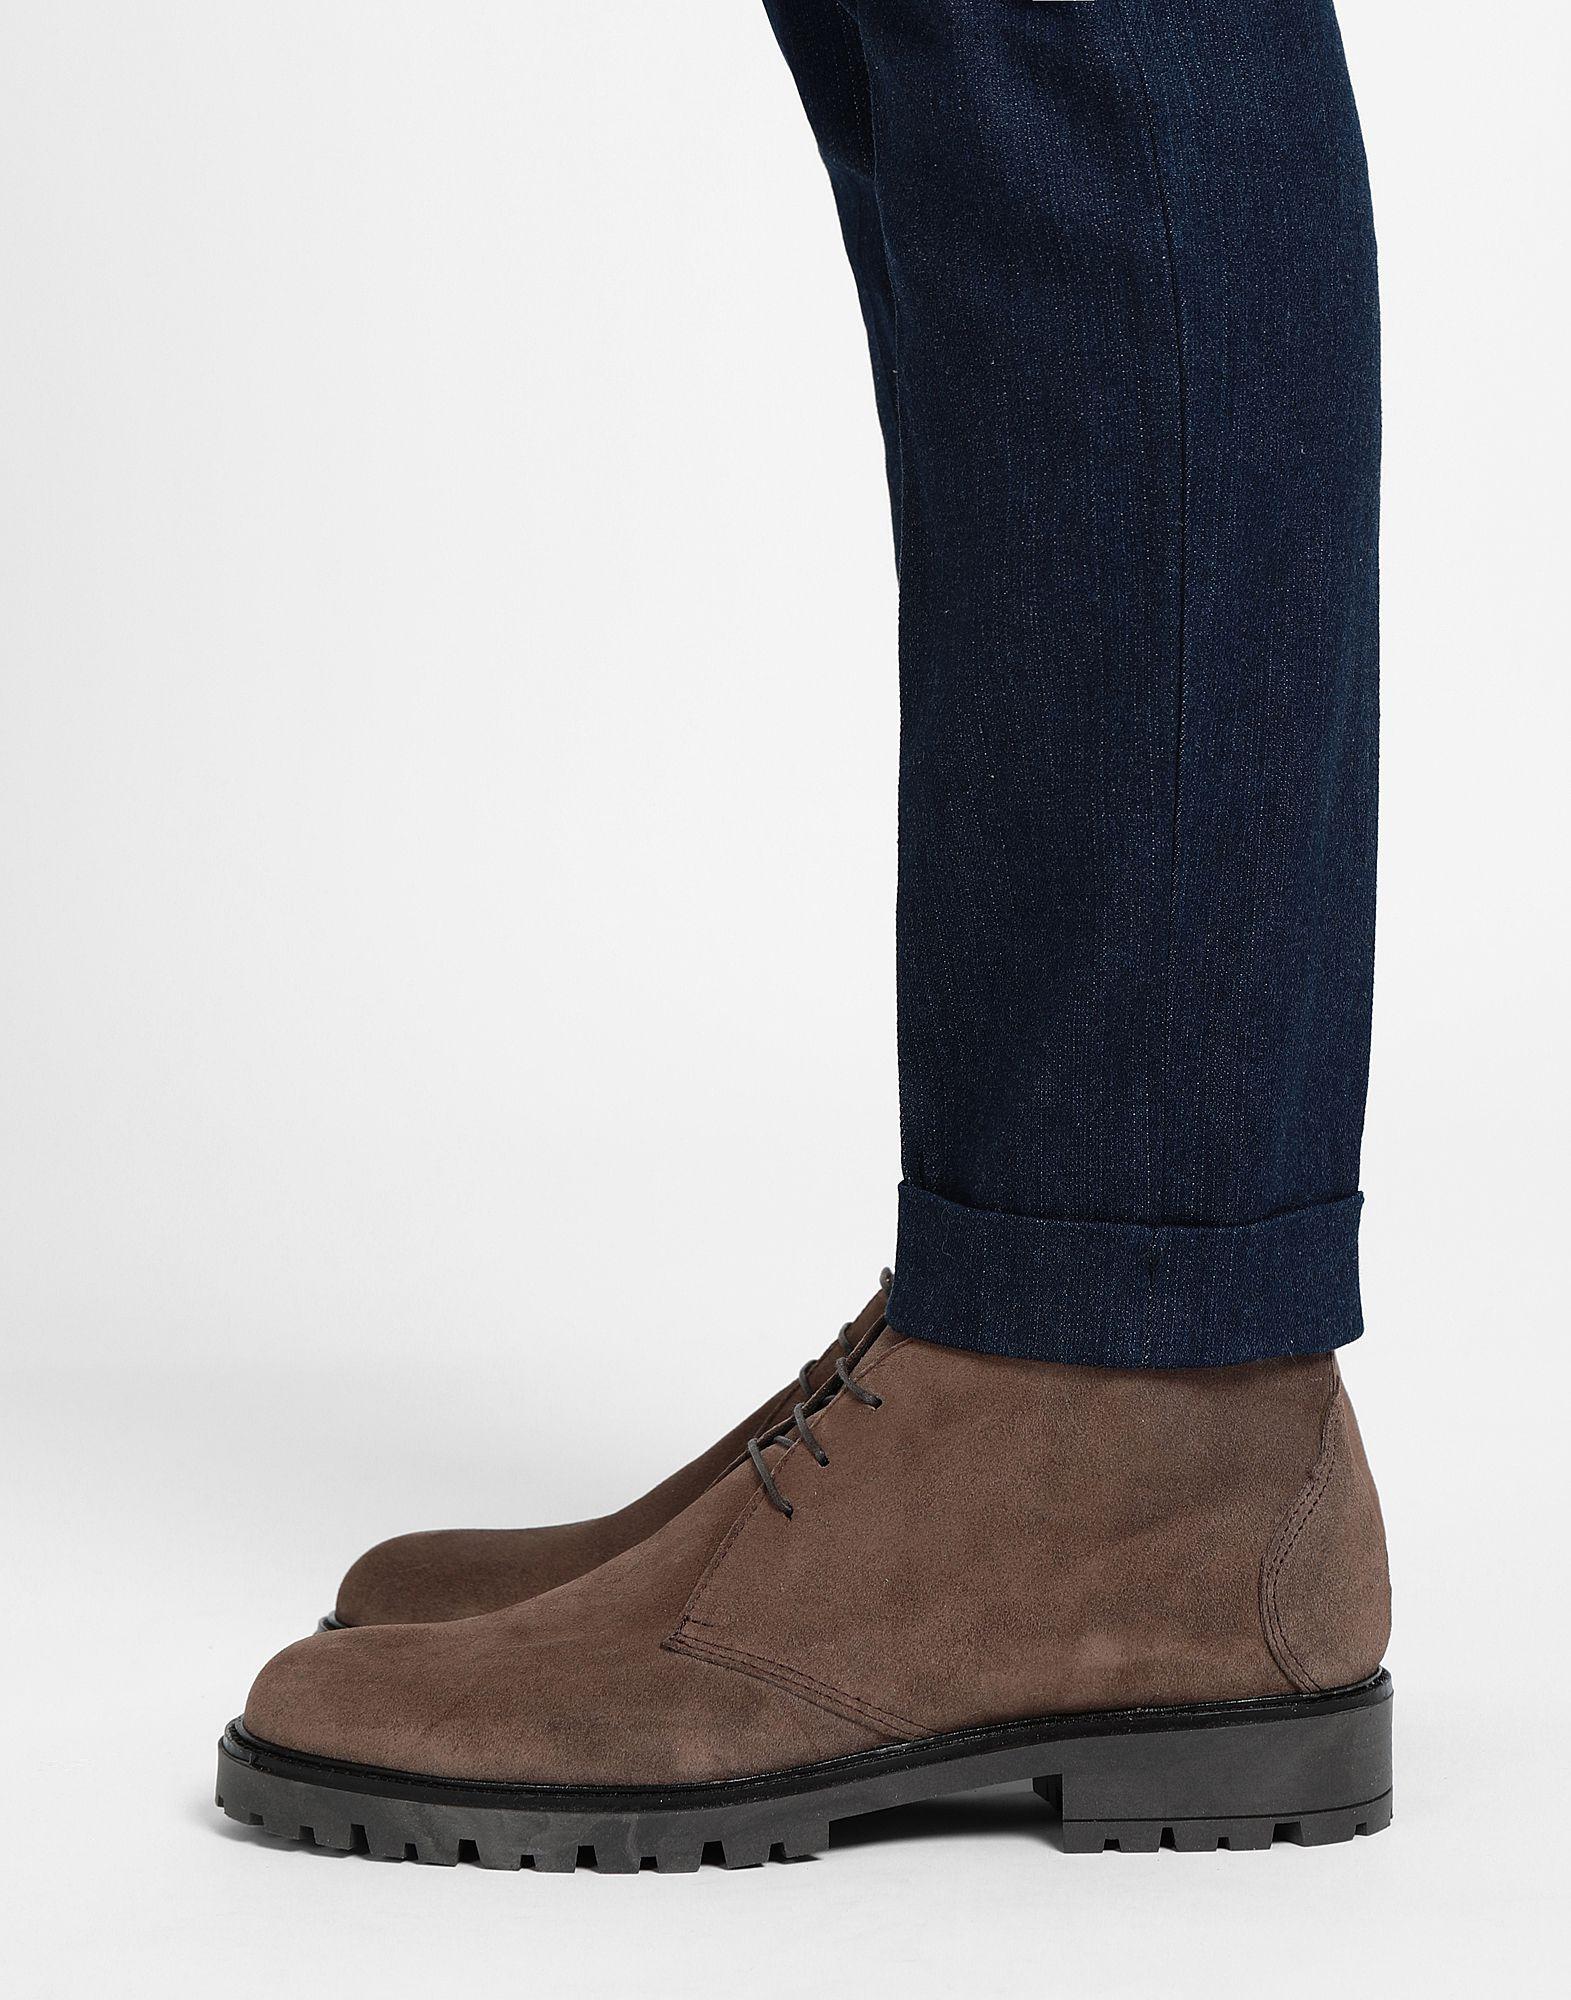 8 by YOOX Ankle Boots in Brown for Men - Lyst